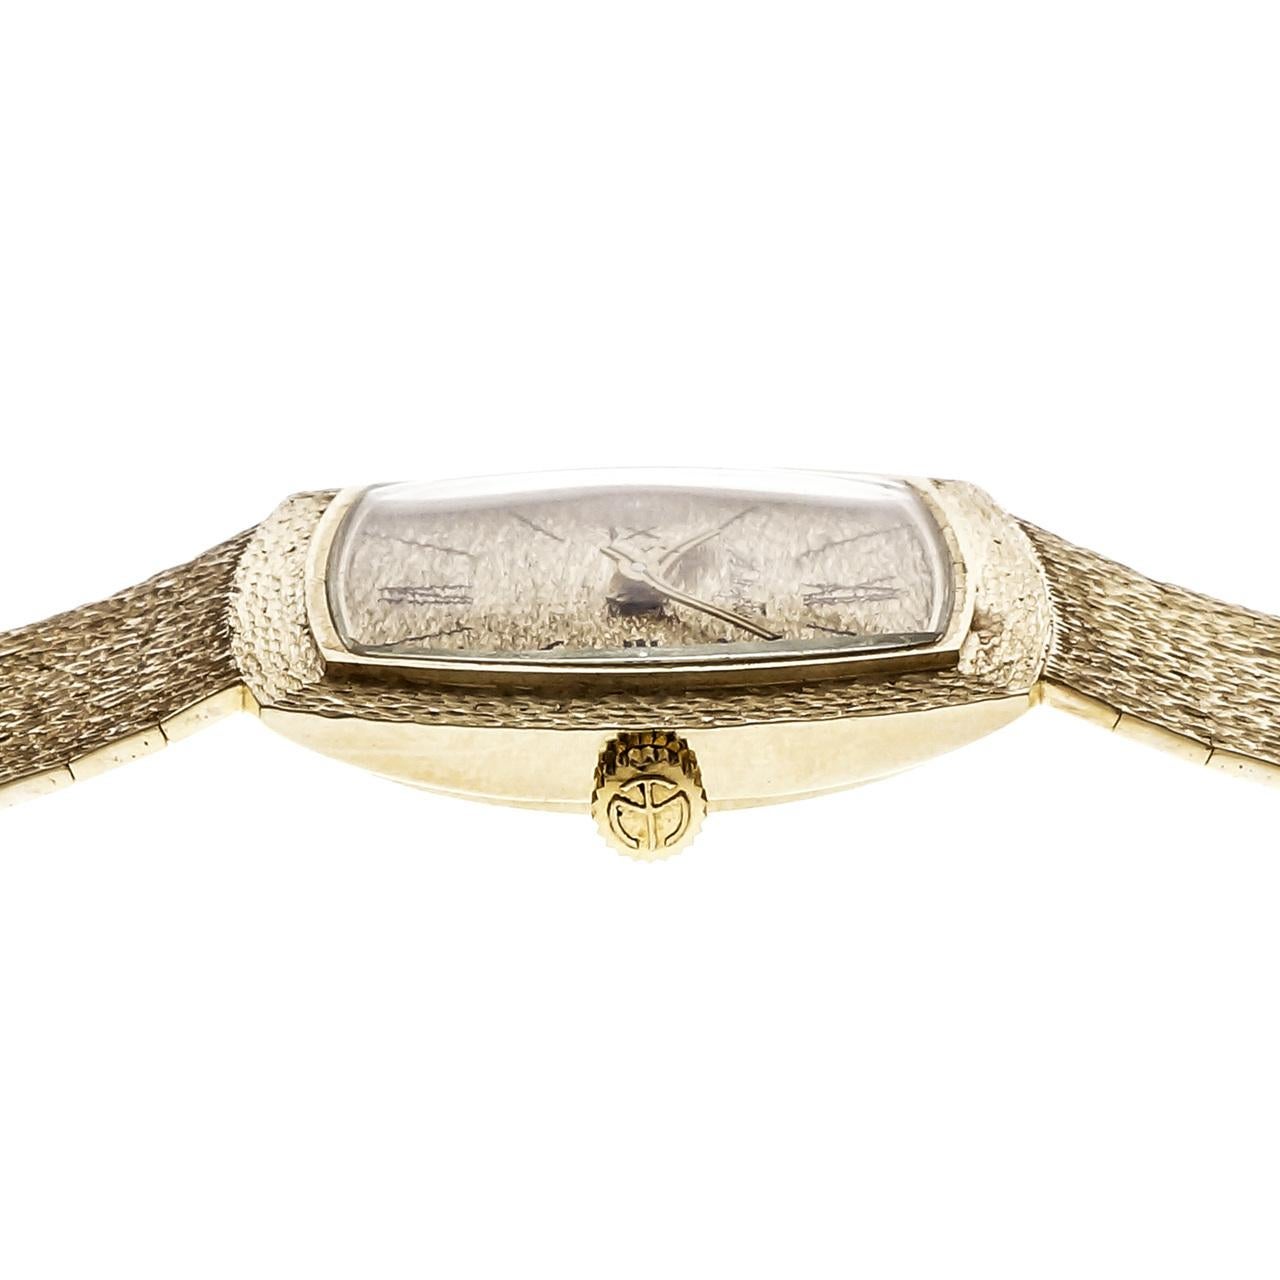 Mathey Tissot 1960 Textured 14k Gold Wrist Watch In Good Condition For Sale In Stamford, CT